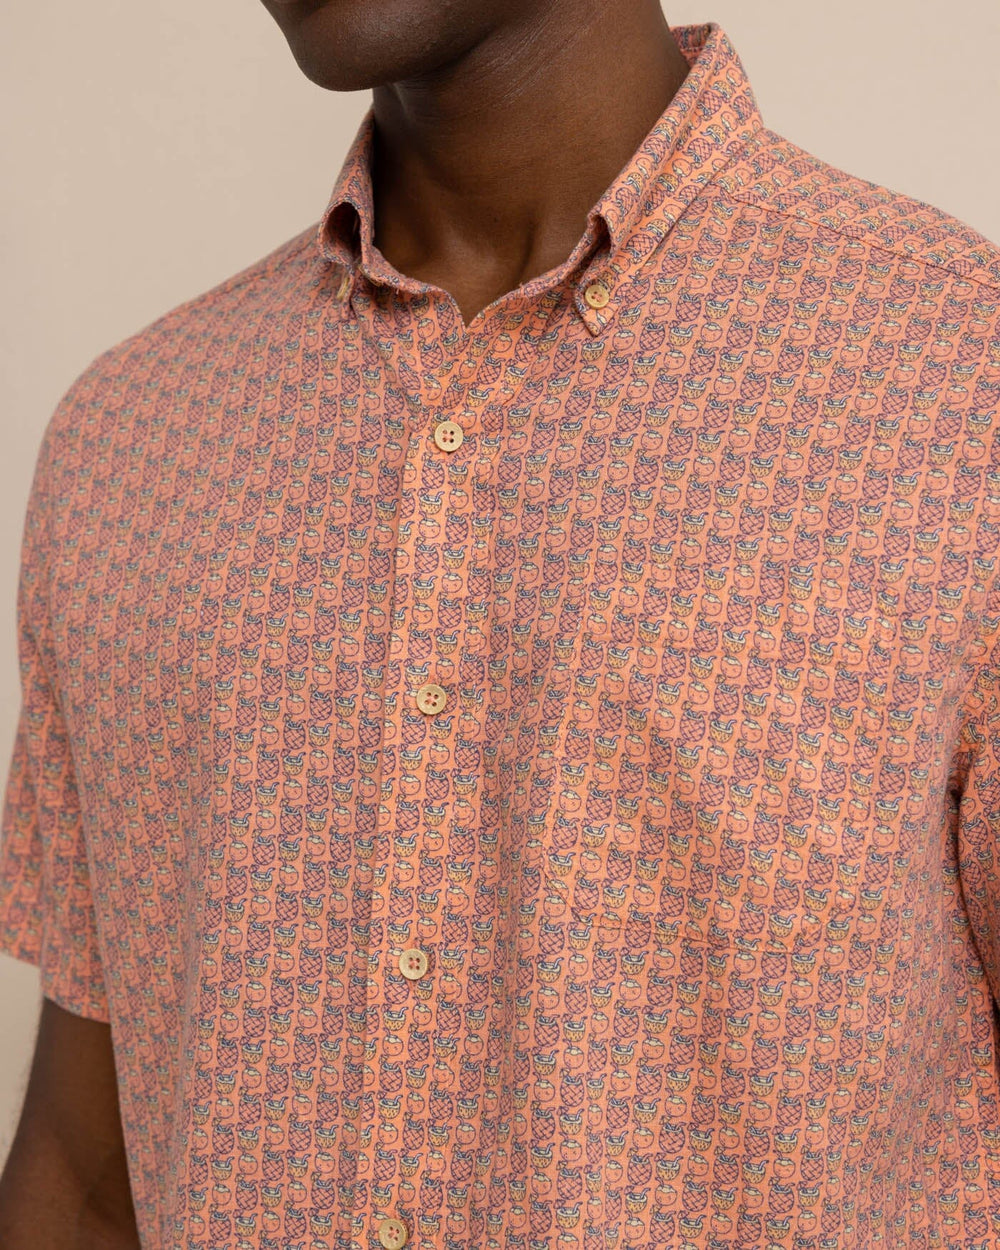 The detail view of the Southern Tide Linen Rayon Vacation Views Short Sleeve SportShirt by Southern Tide - Desert Flower Coral